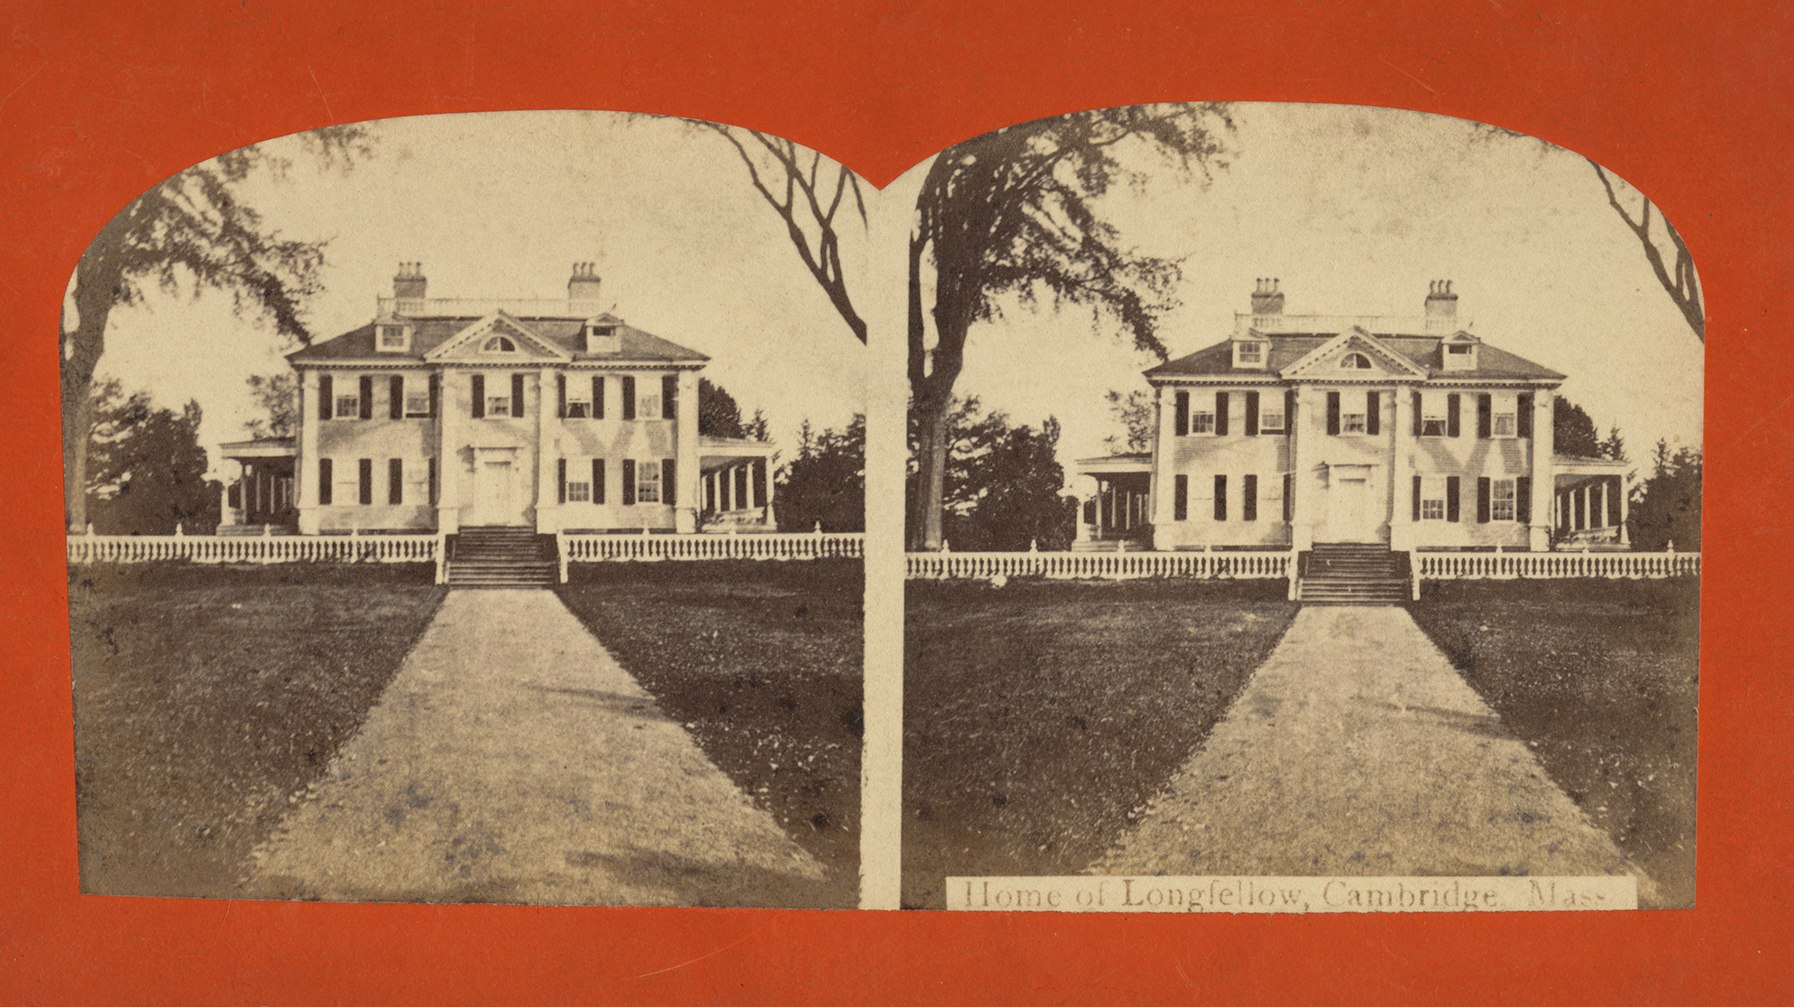 Stereograph card of the home of Longfellow Cambridge Mass  1850 1920 Bpl 1